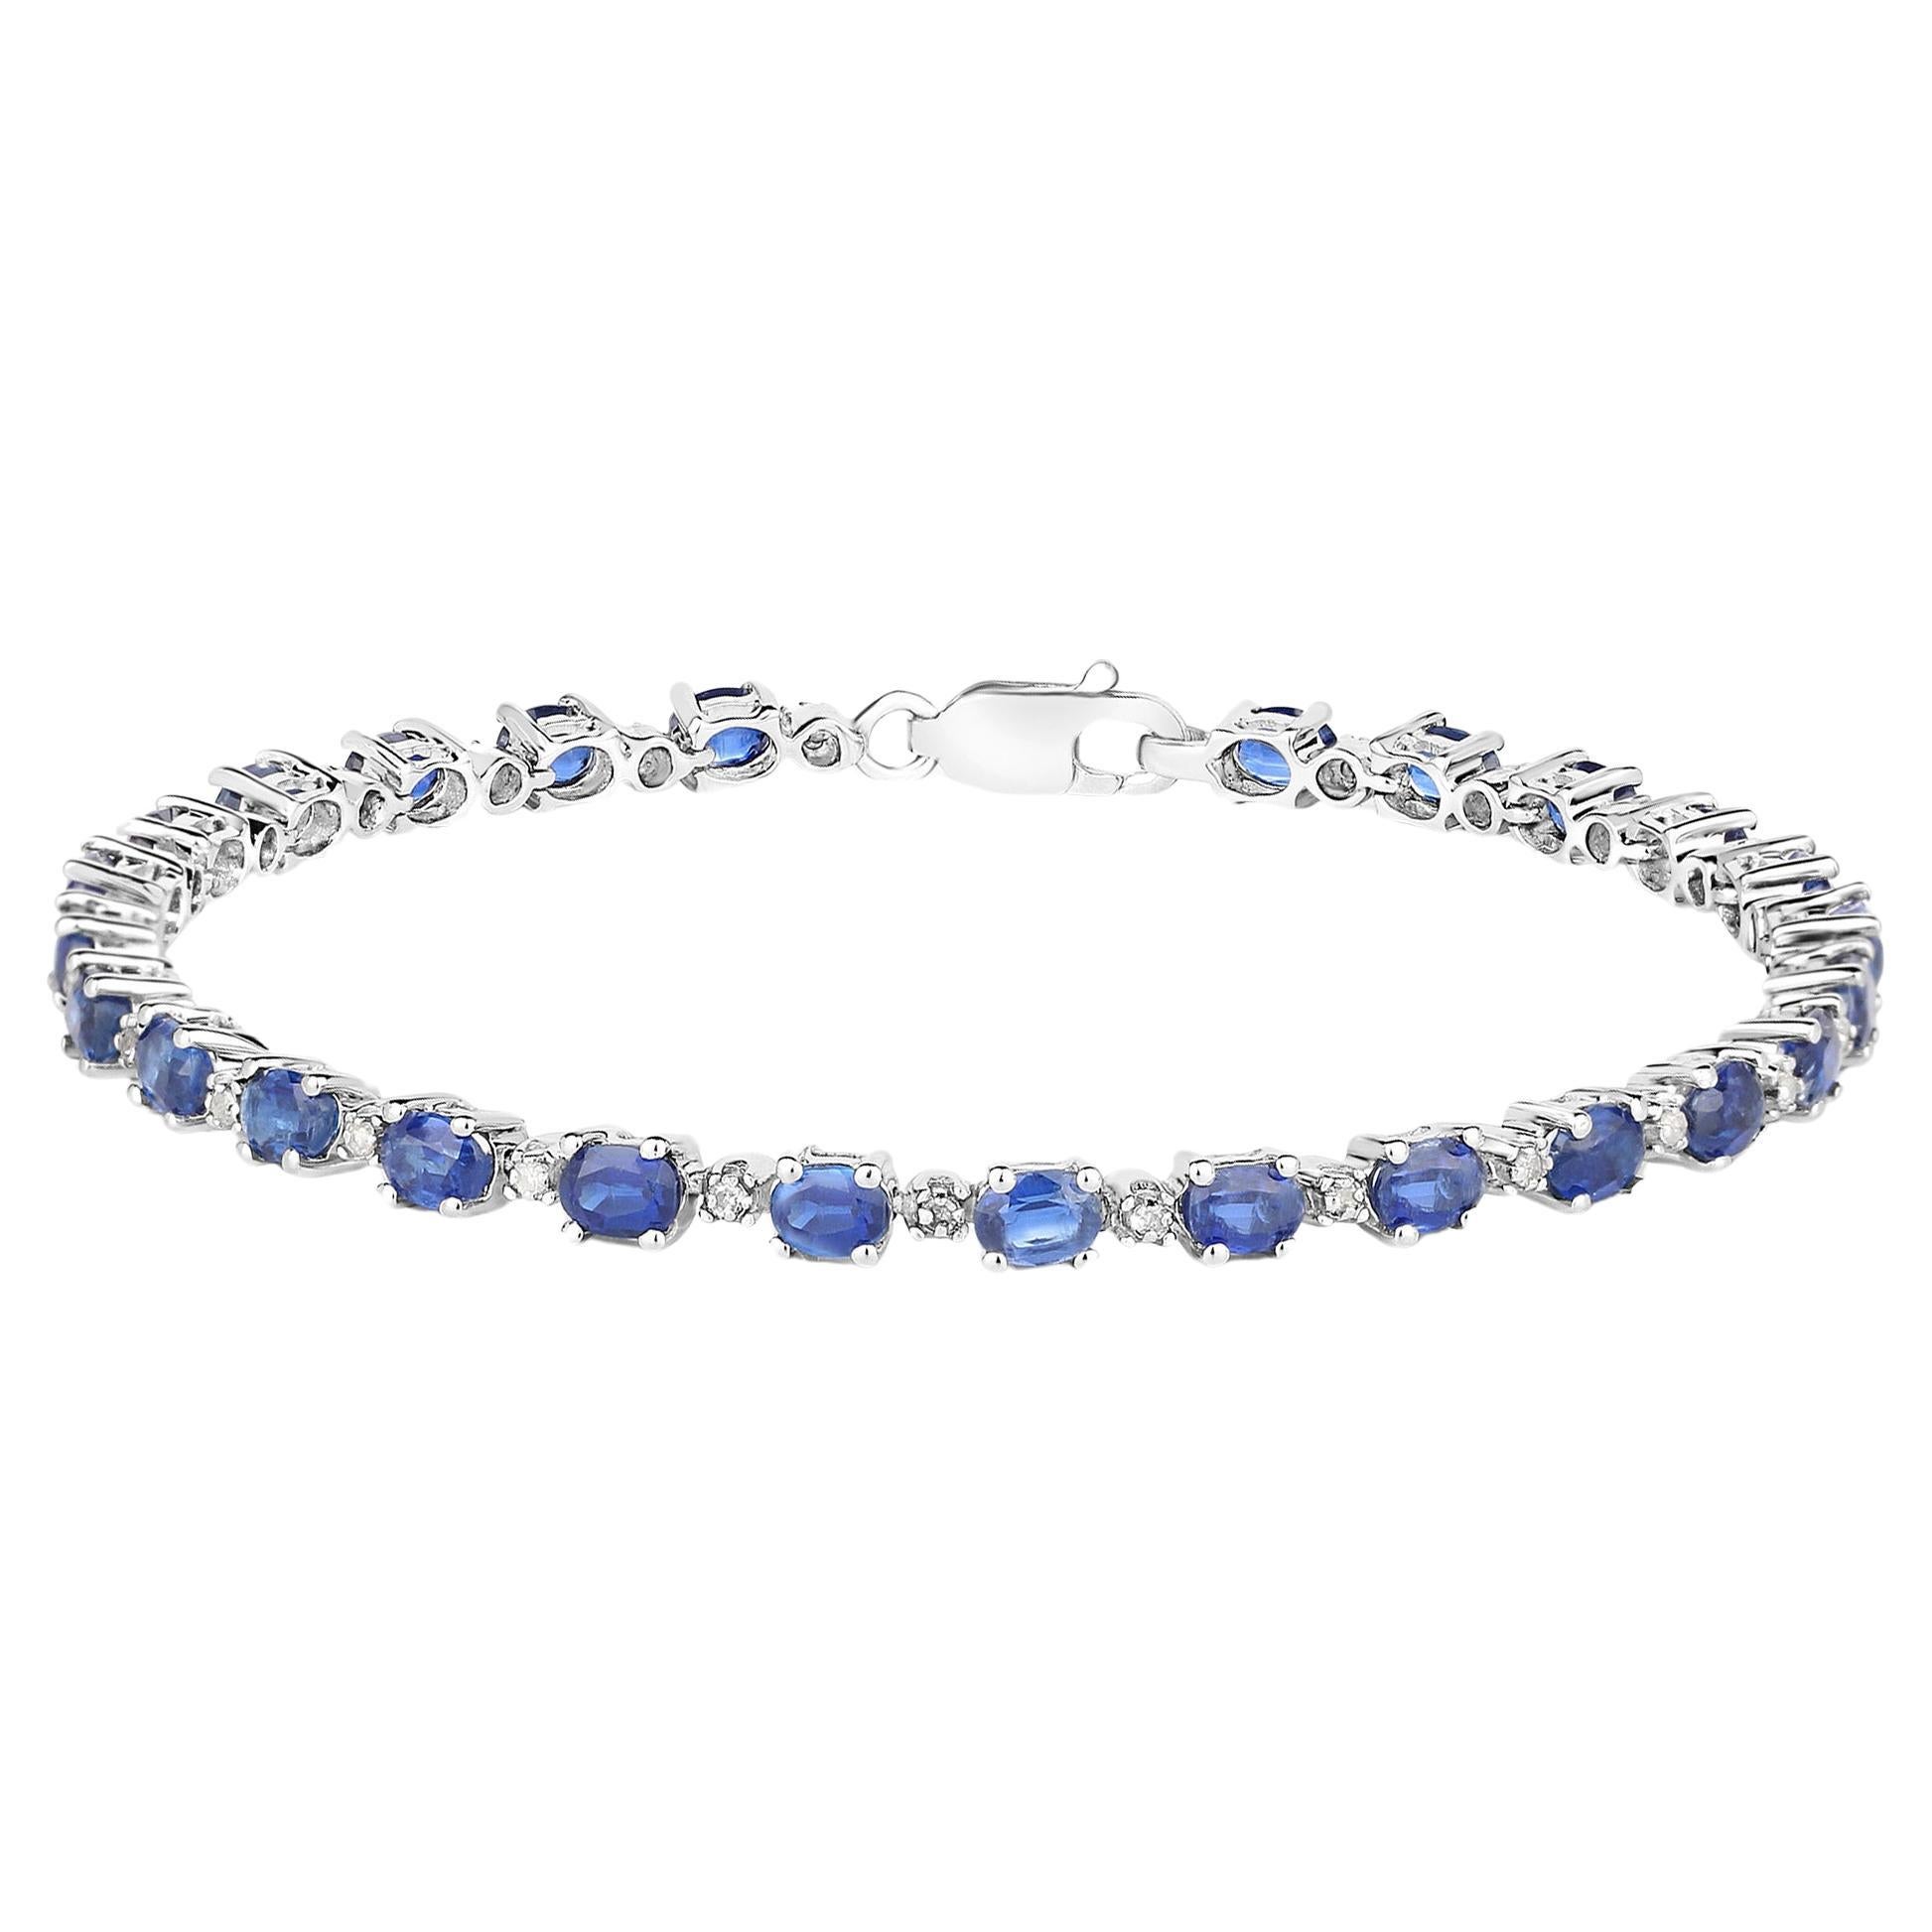 Kyanite Tennis Bracelet With Diamonds 6.73 Carats Rhodium Plated Sterling Silver For Sale